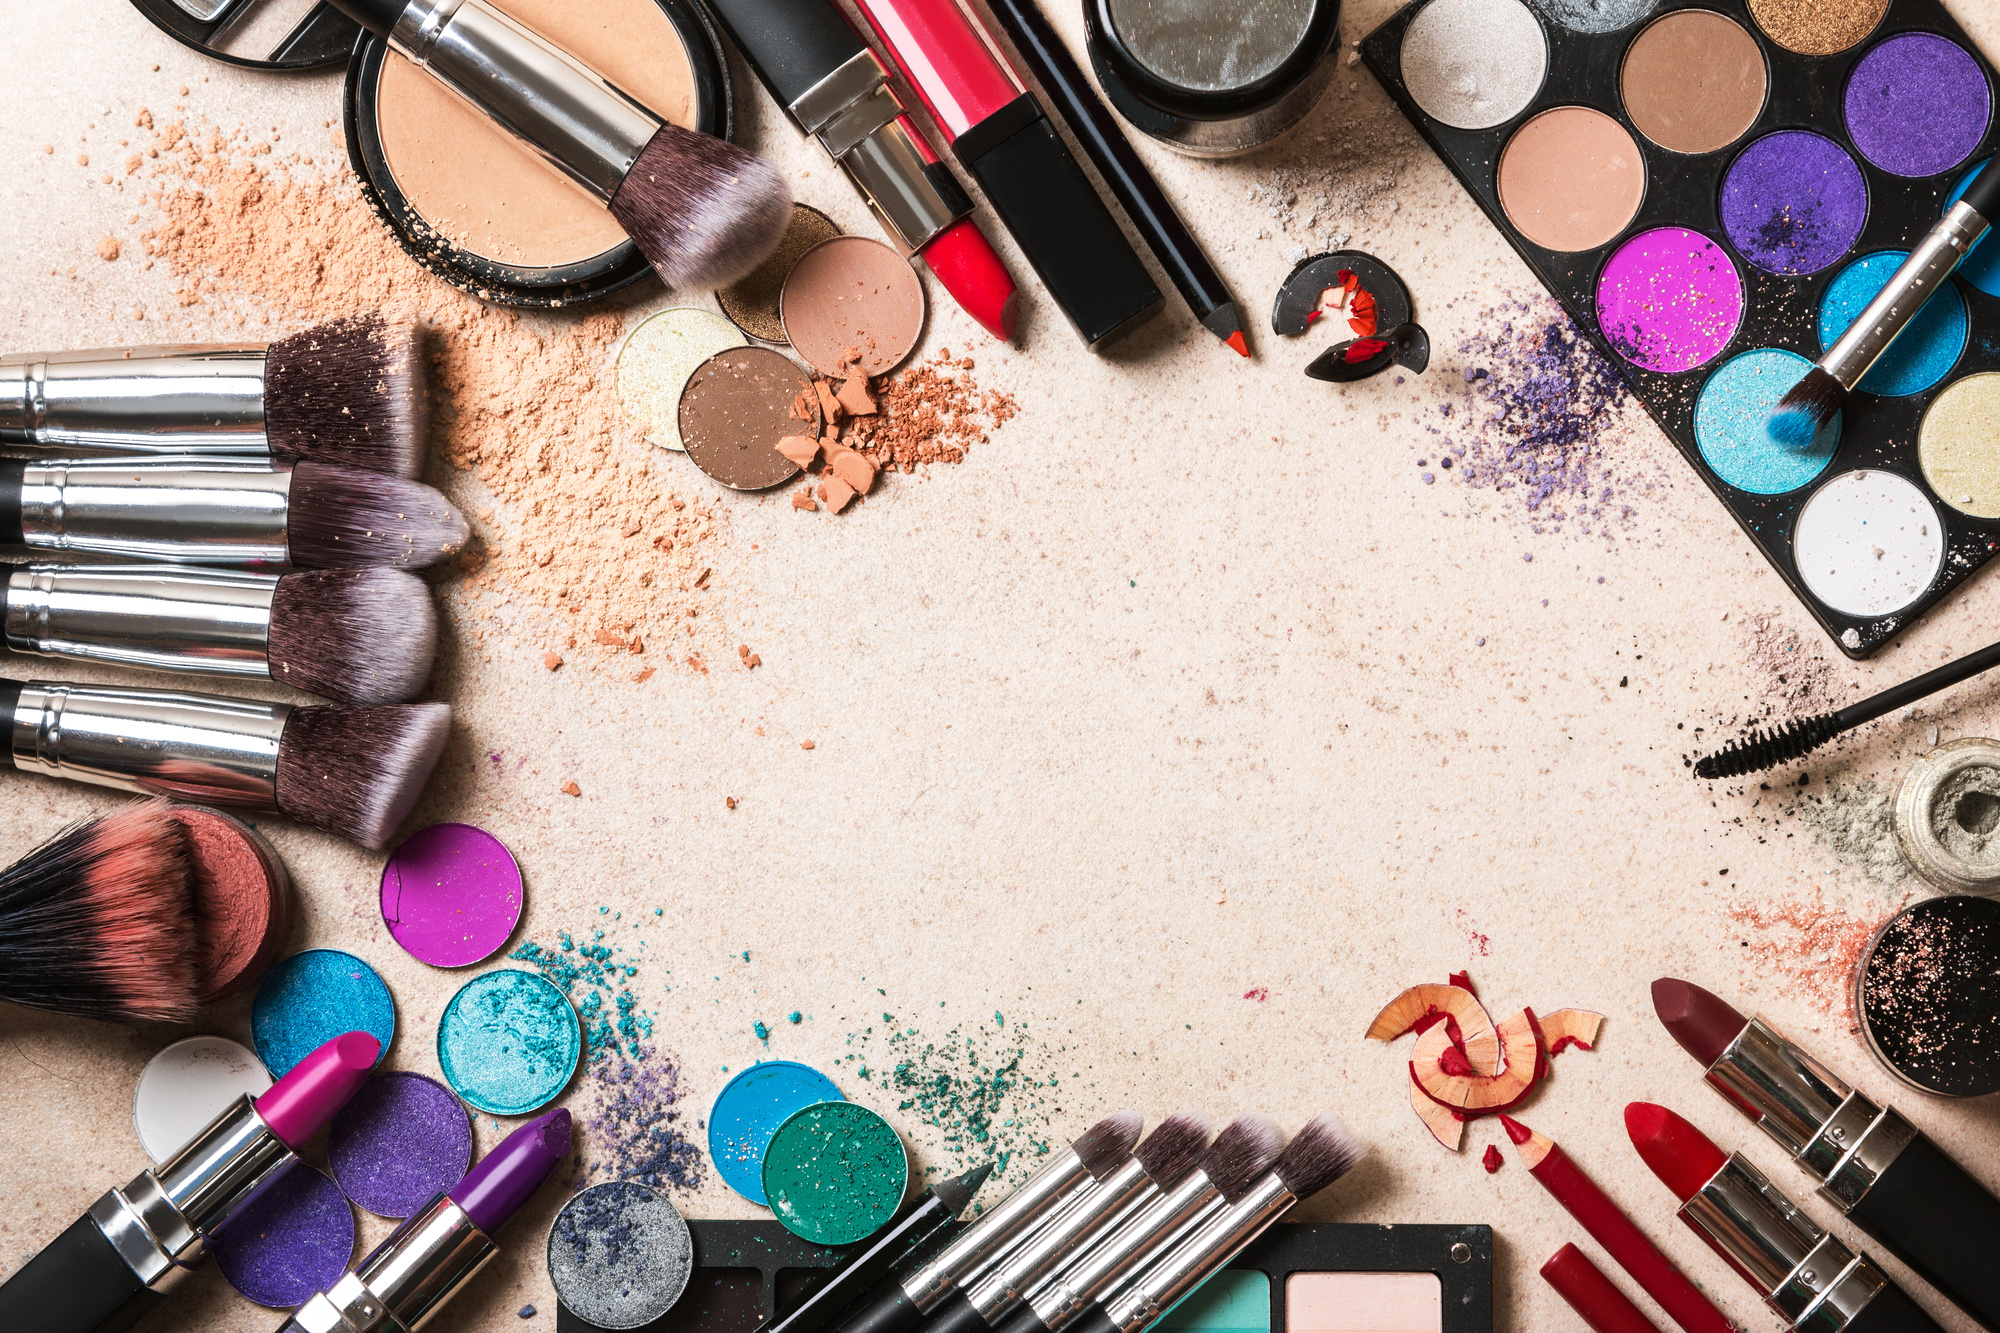 All That Glitters: How to Start a Makeup Business